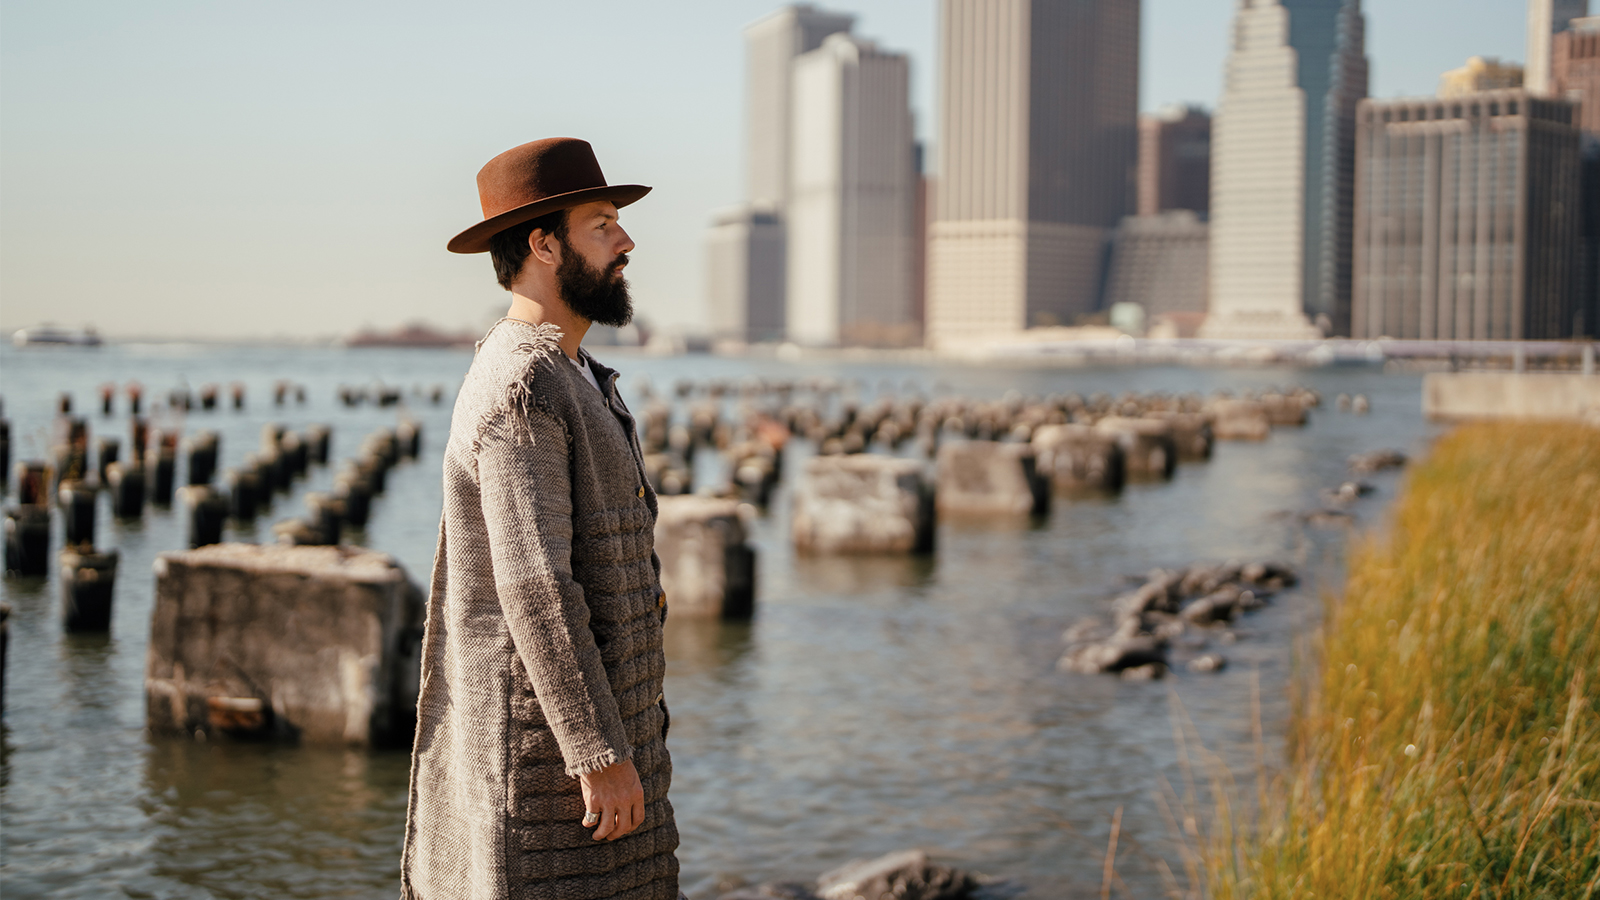 Nomad Ombre Coffee - Worth & Worth - Hat Maker - Custom Hats - NYC